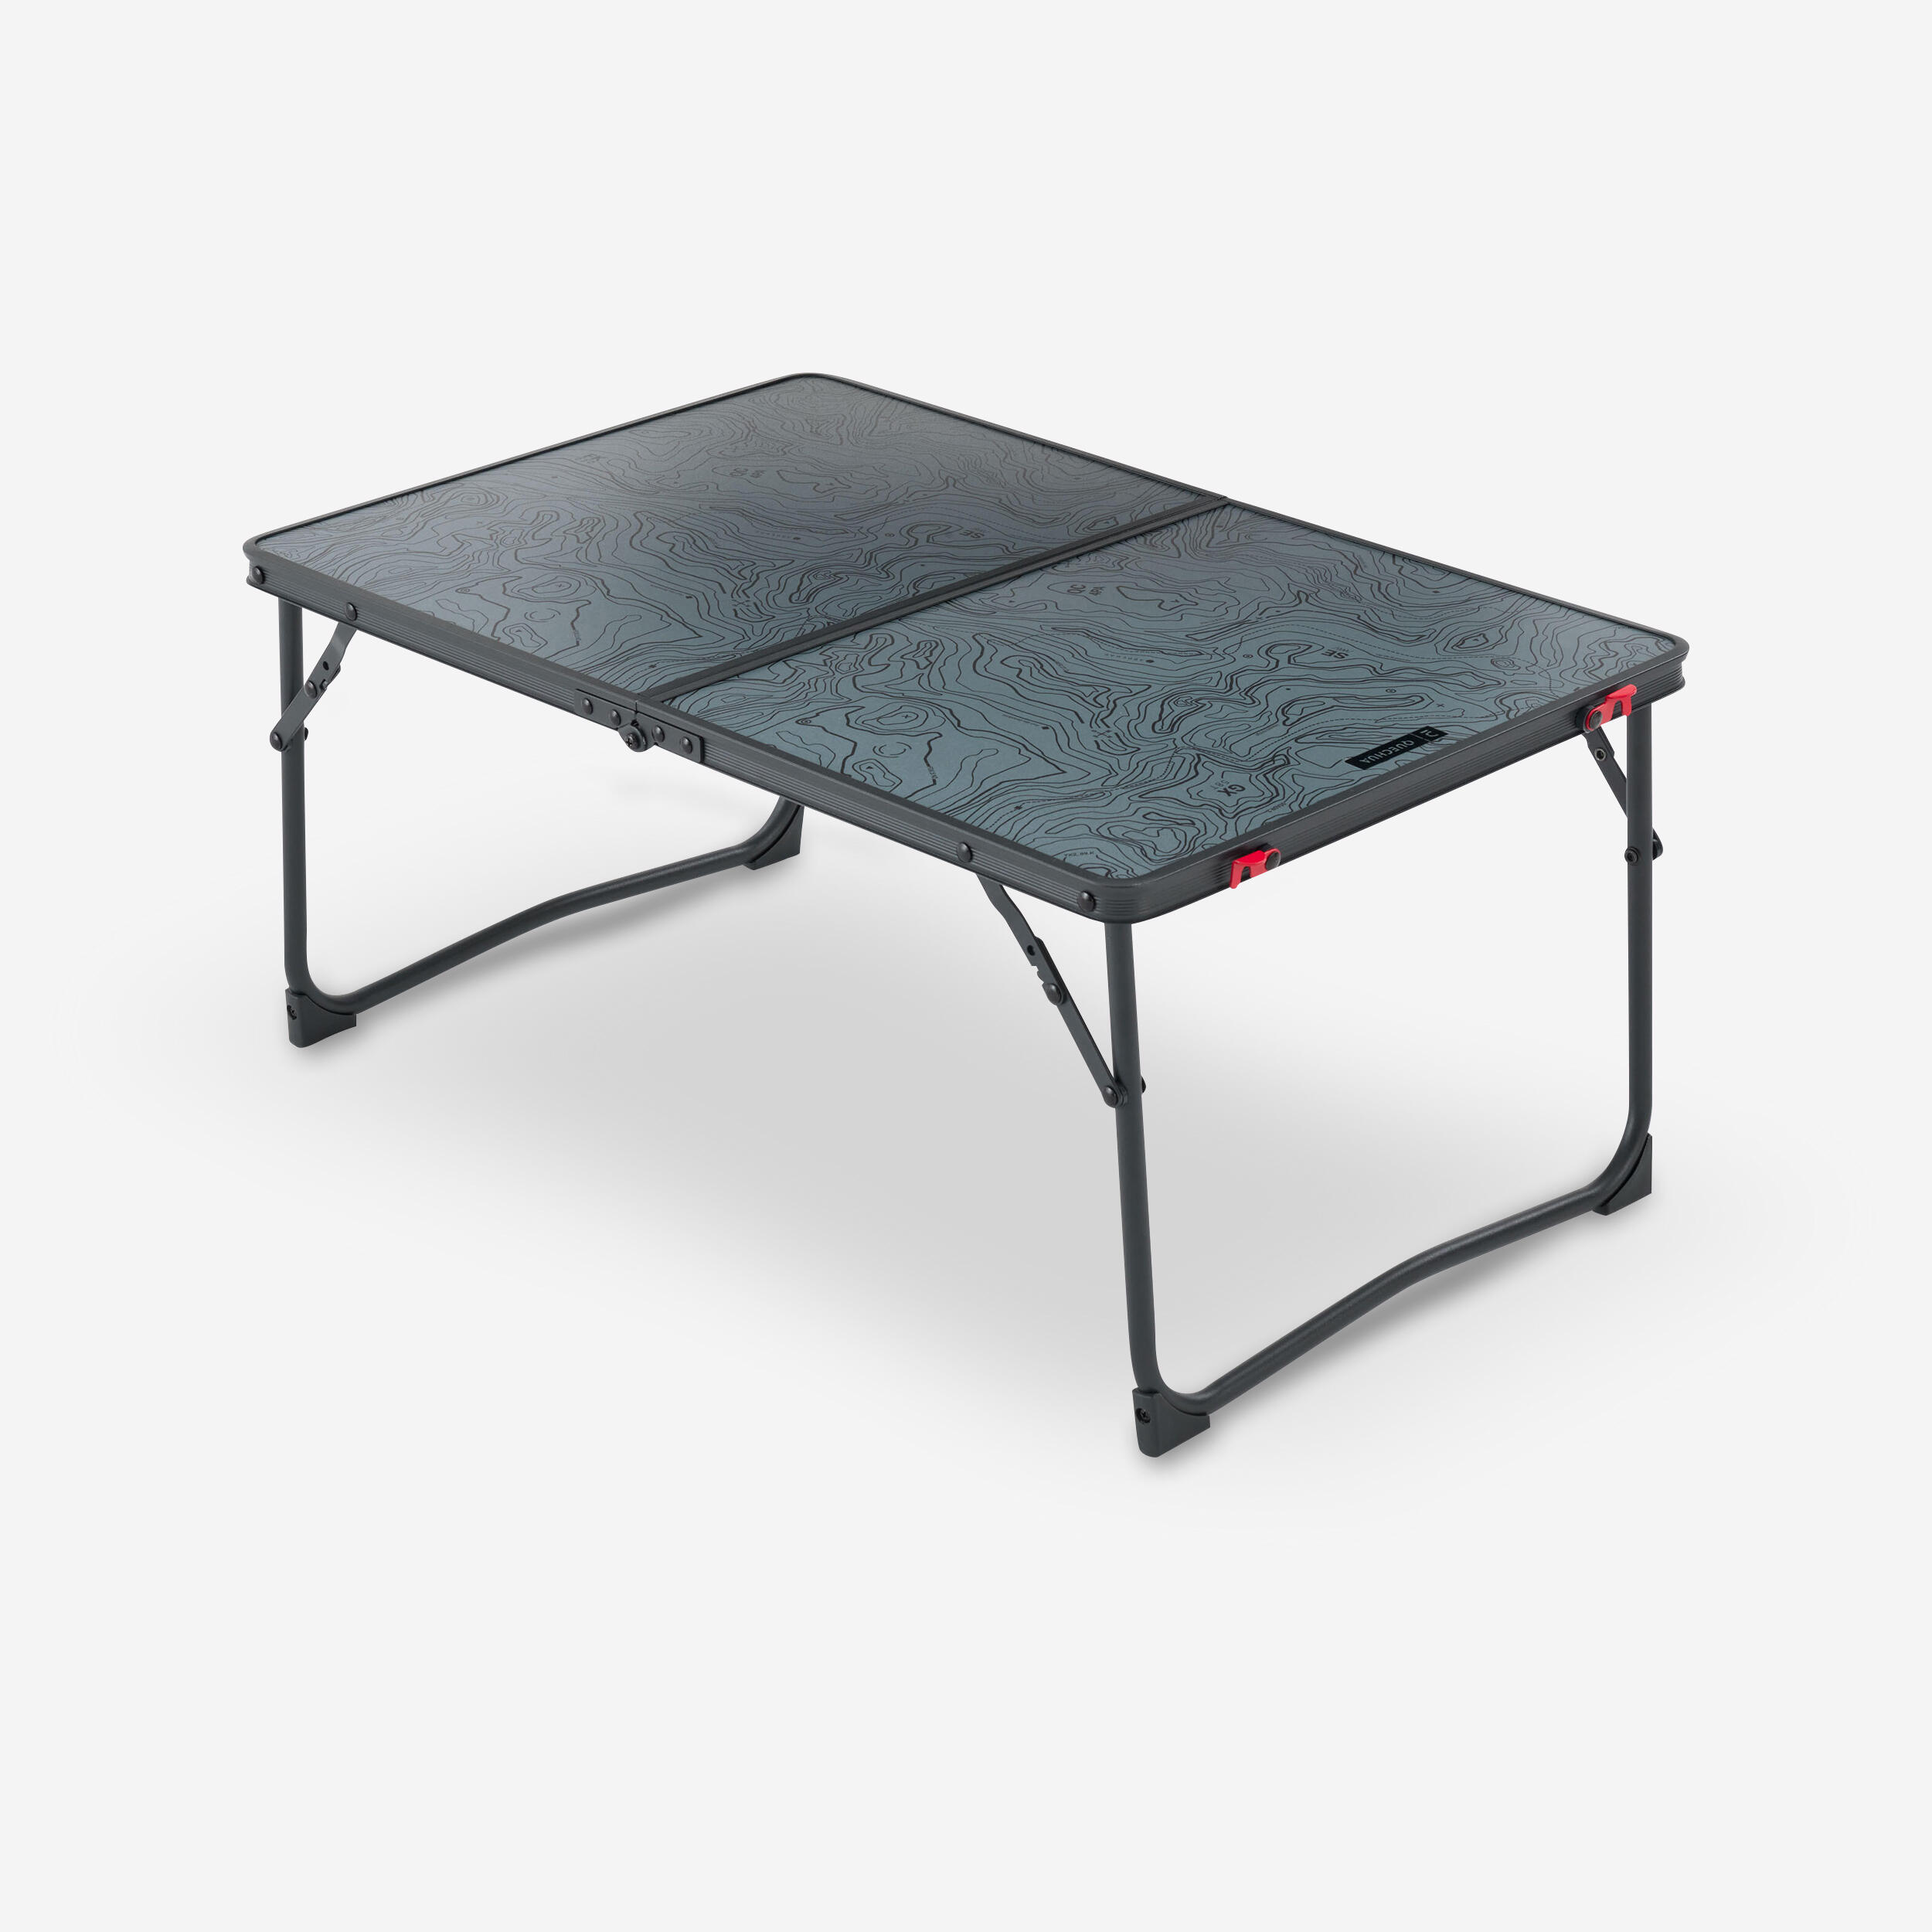 LOW FOLDING CAMPING TABLE - MH100 - GREY 10/10